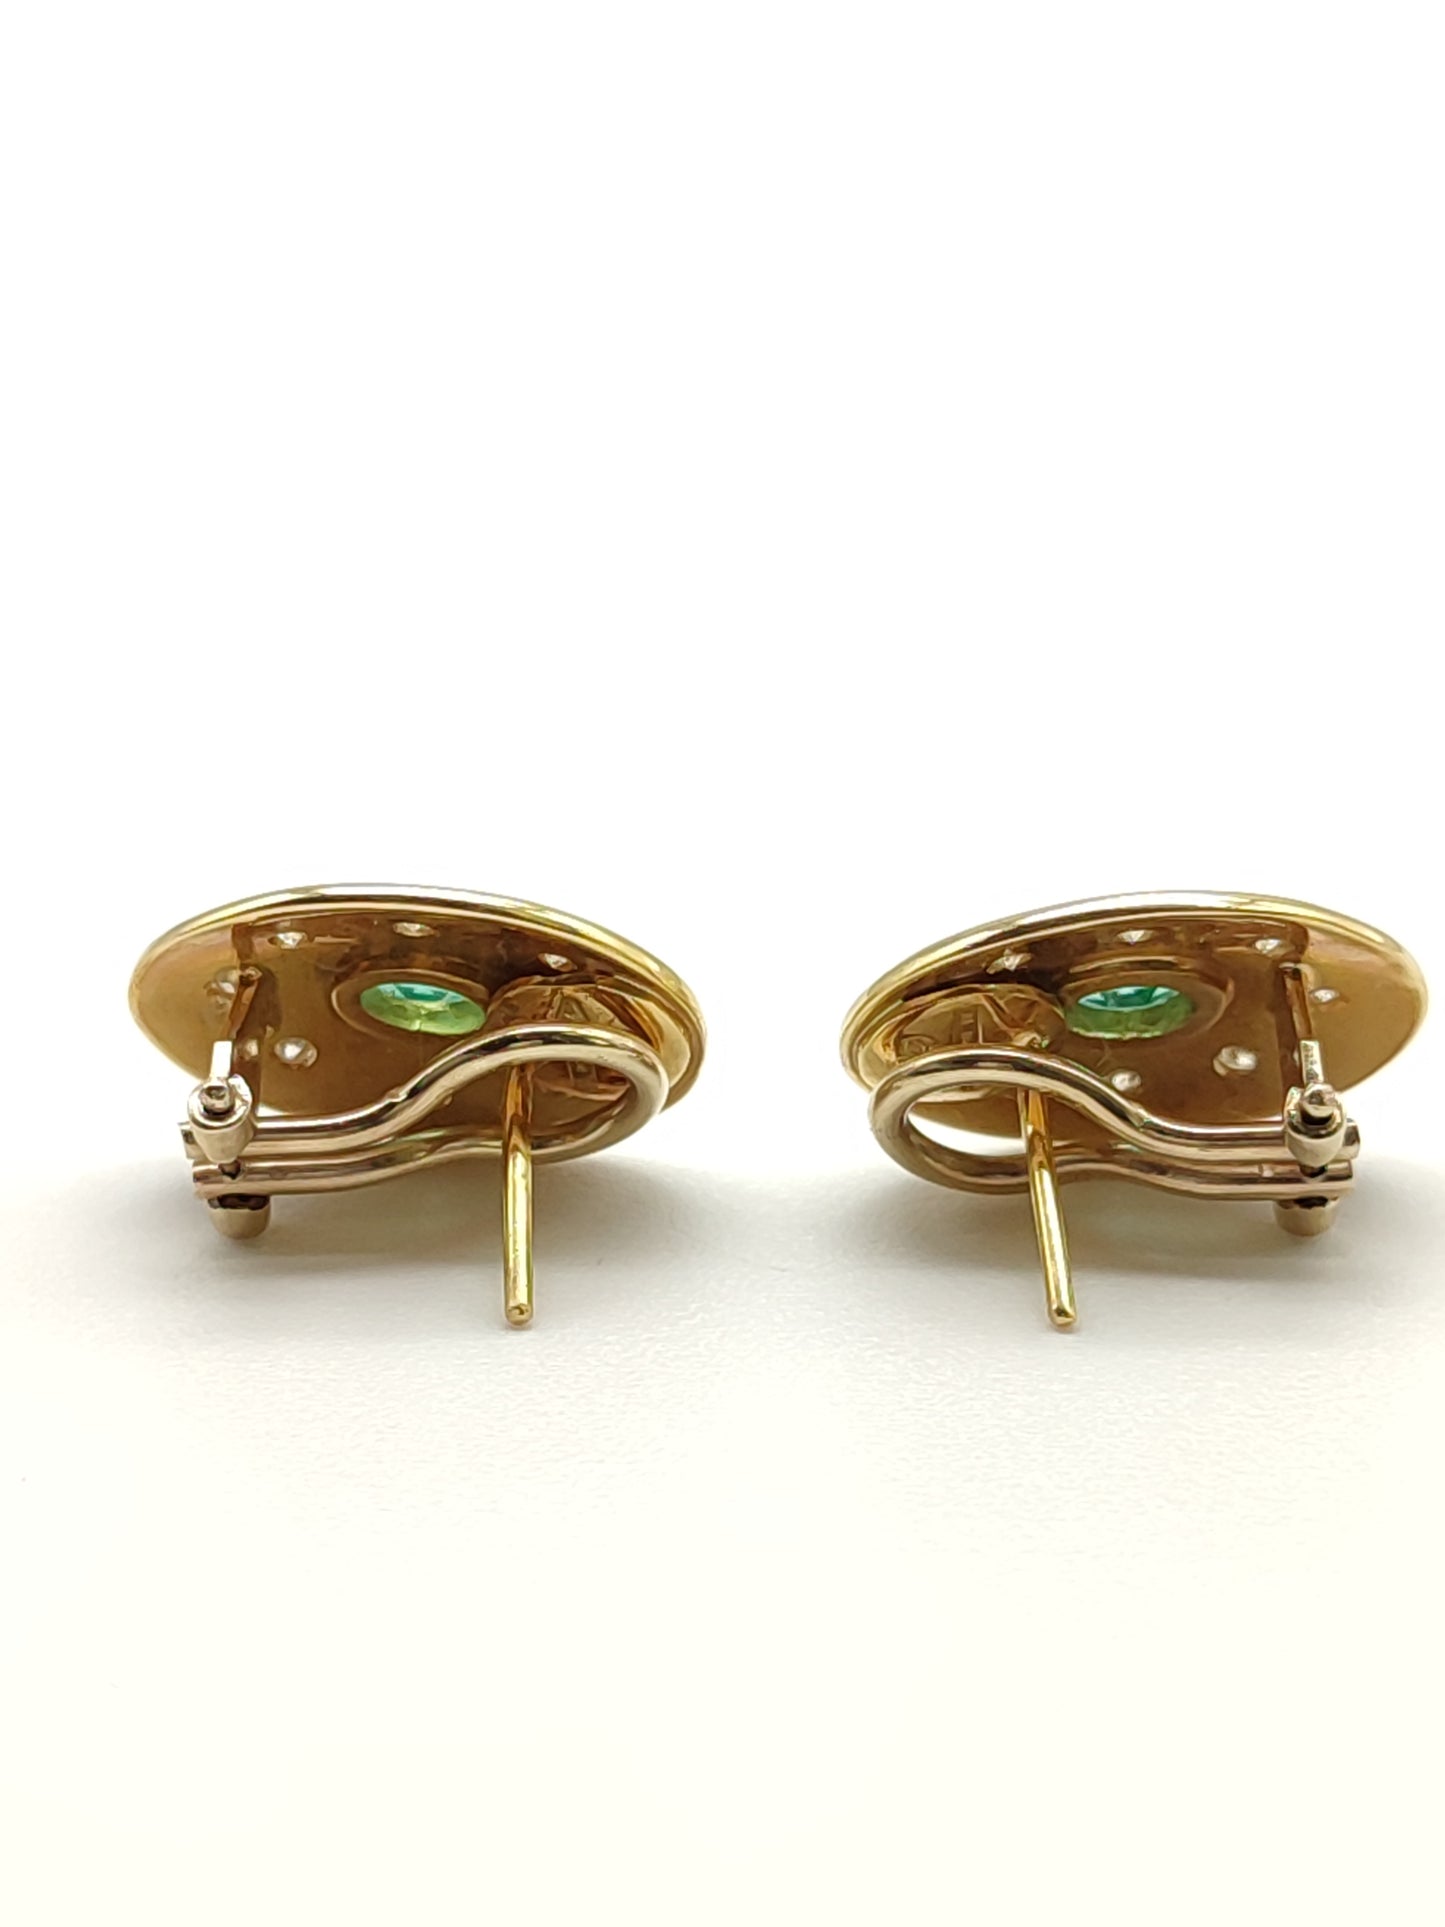 Gold earrings with diamonds and emeralds